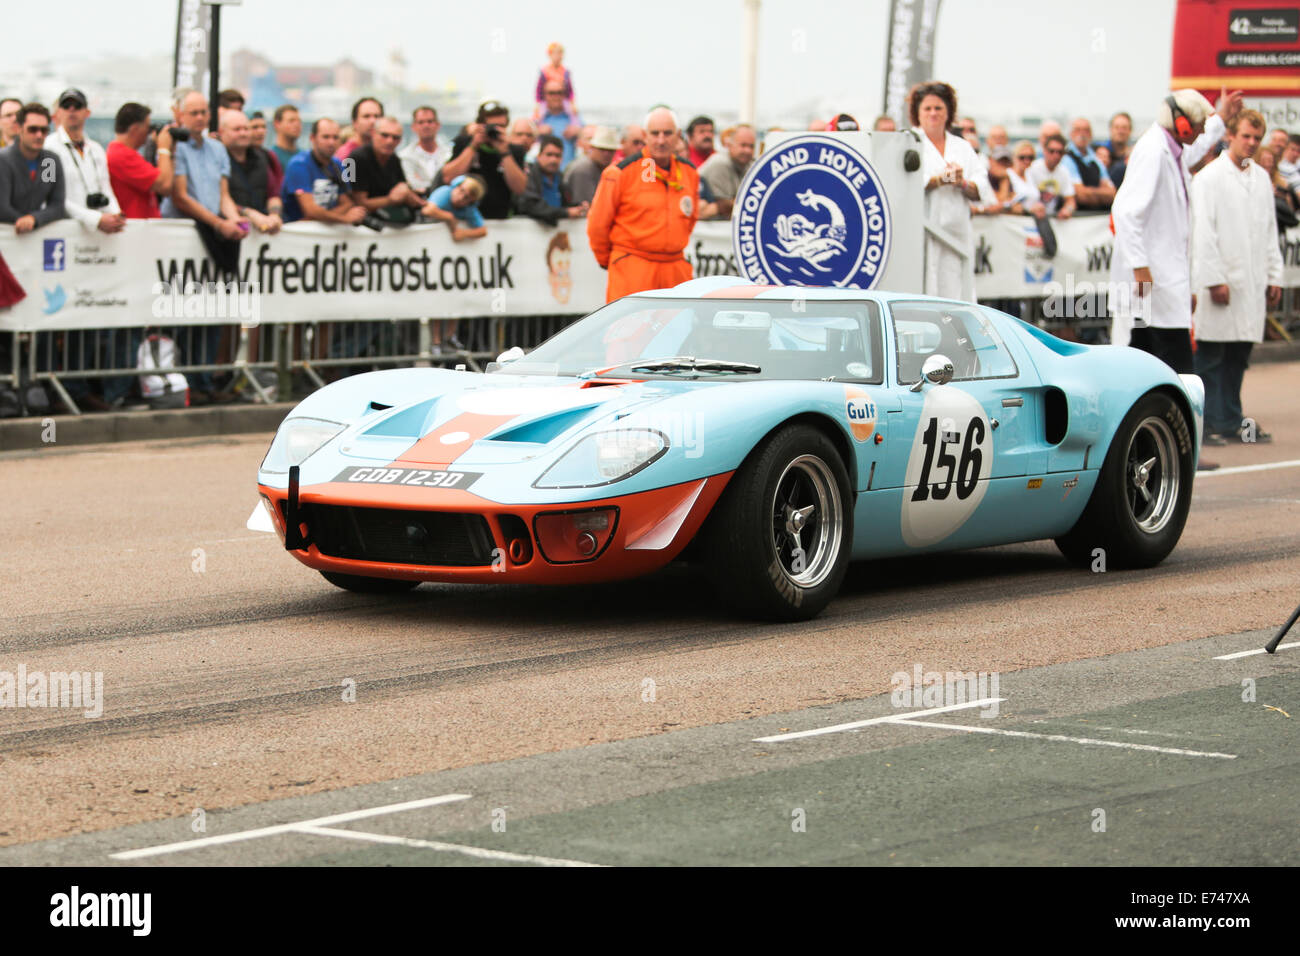 This is Glenn Mason driving a Southern GT GT40 at the Brighton Speed National Trials organised by the Brighton & Hove Motor Club held annually at Madeira Drive, Brighton Seafront, Brighton, East Sussex, UK Stock Photo